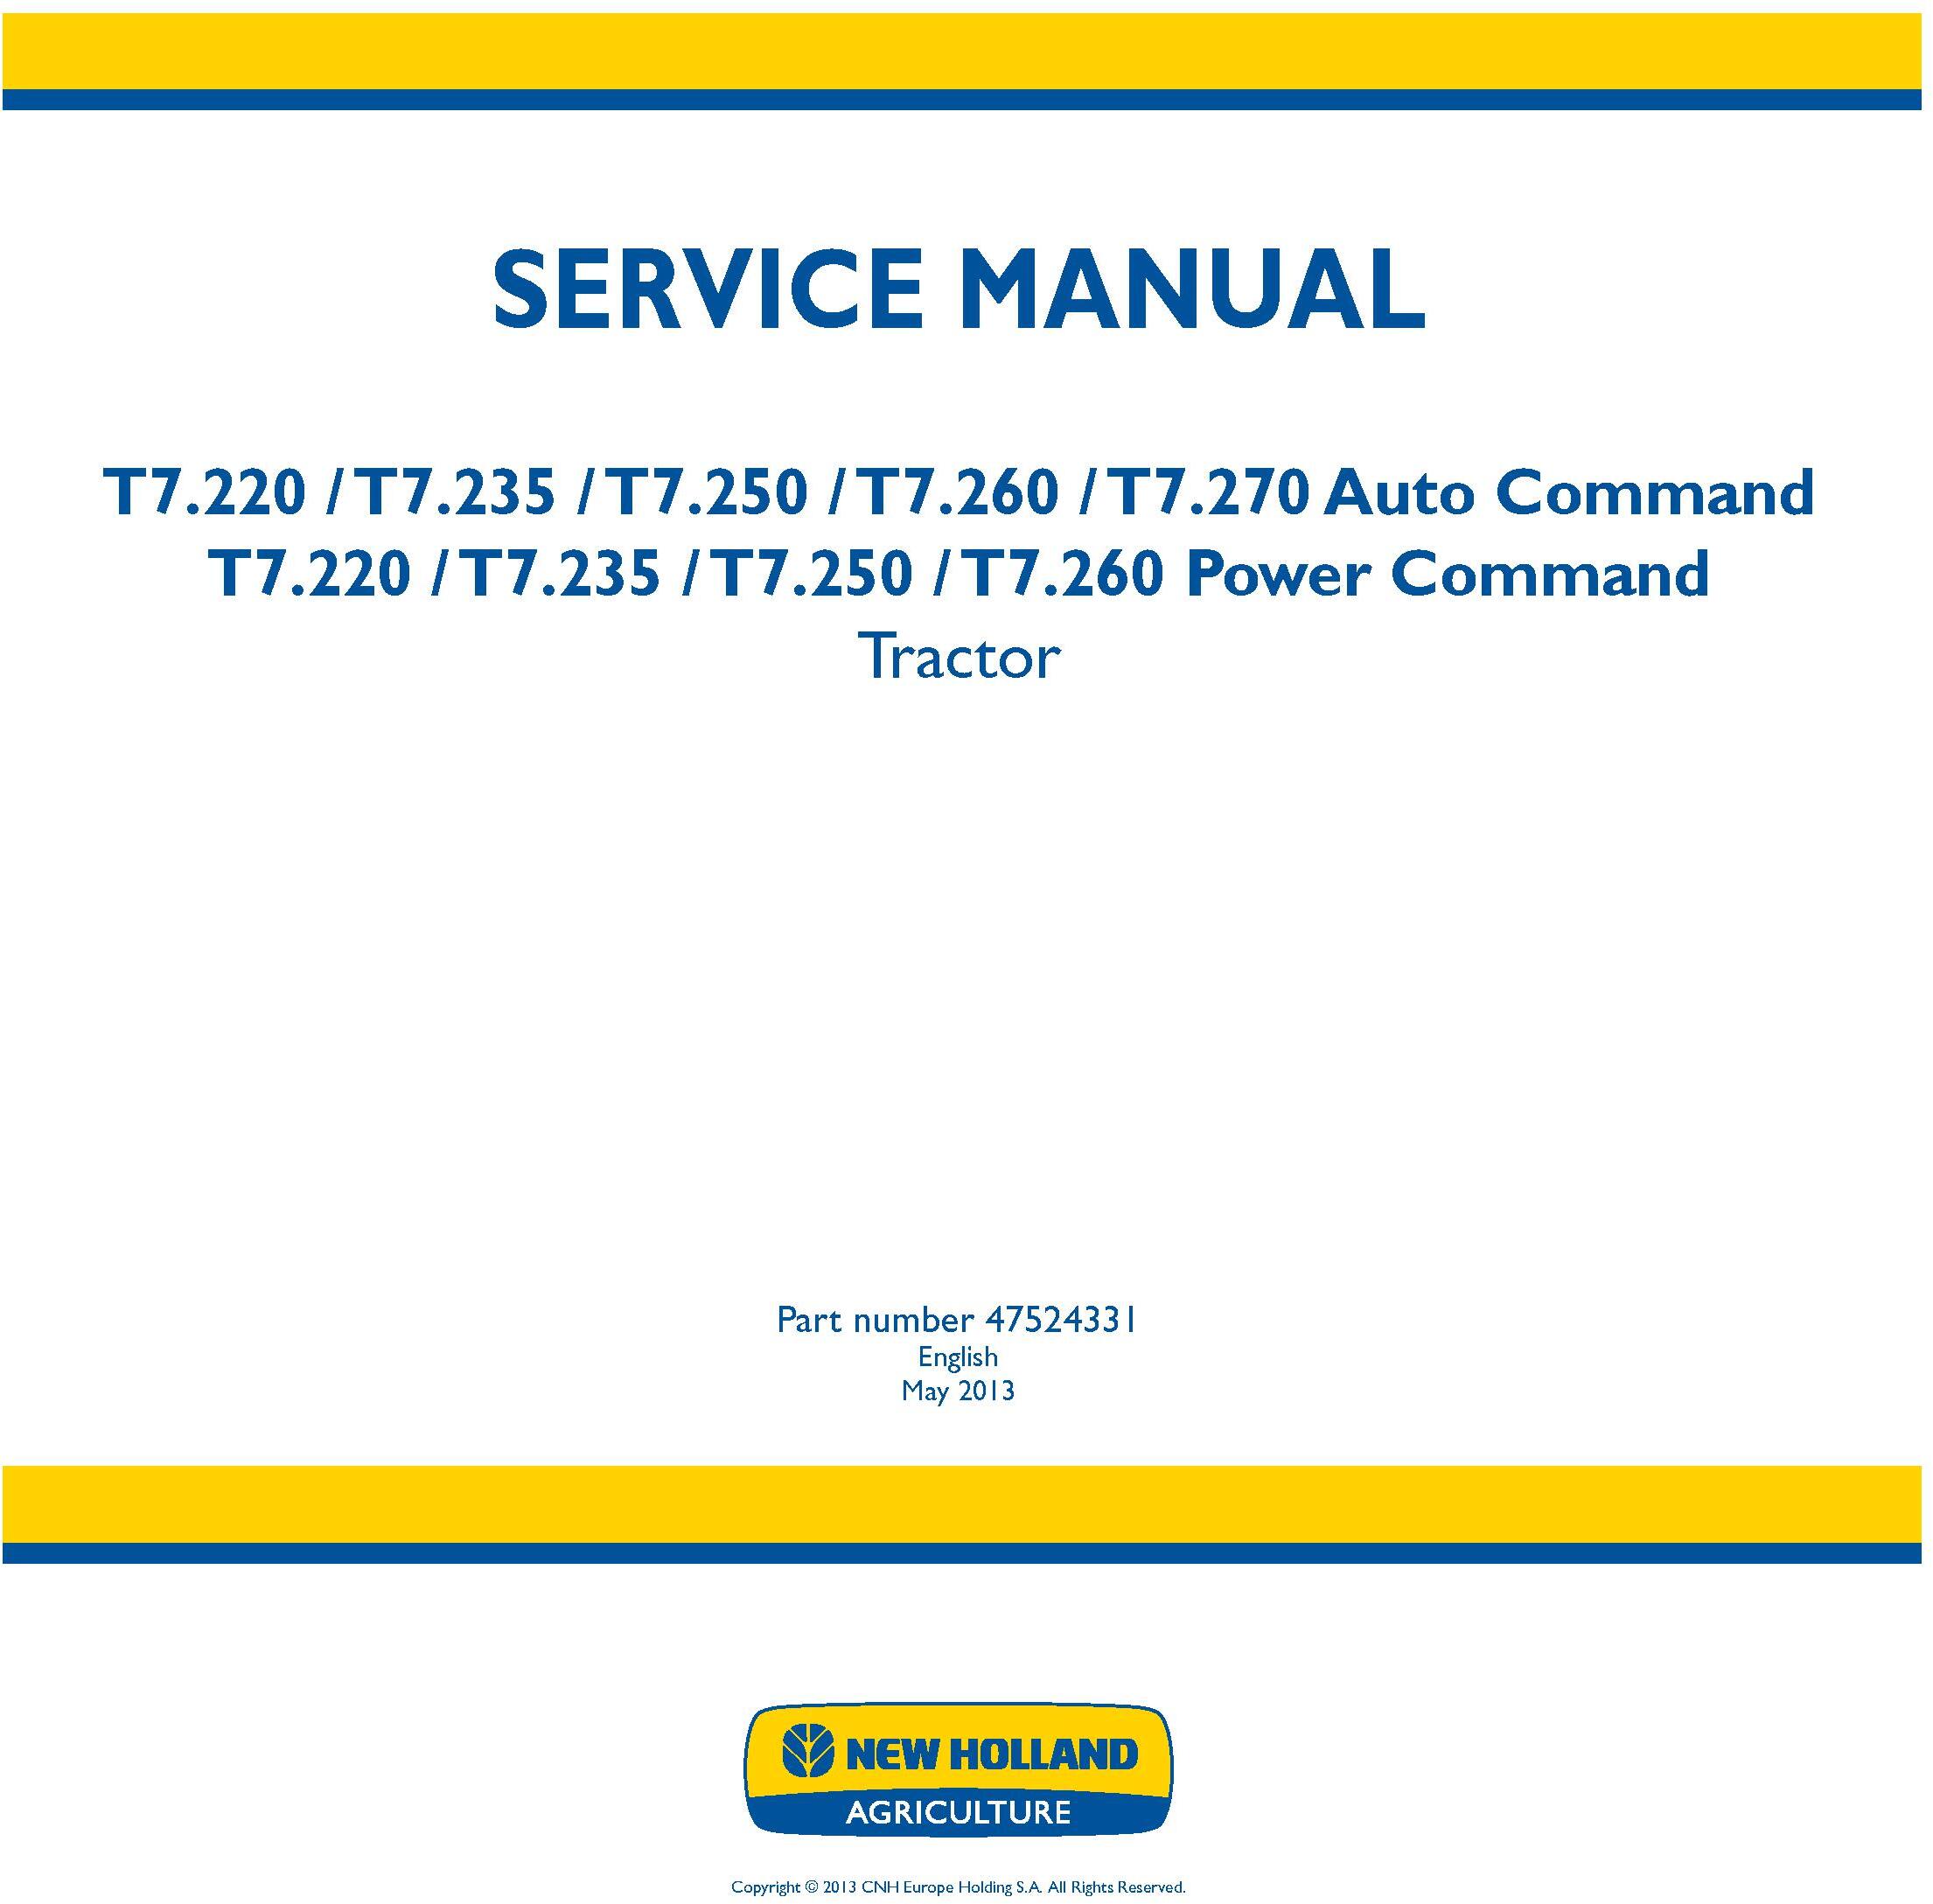 New Holland T7.220, T7.235, T7.250, T7.260, T7.270 Auto Command/Power Command Tractor Service Manual - 19385